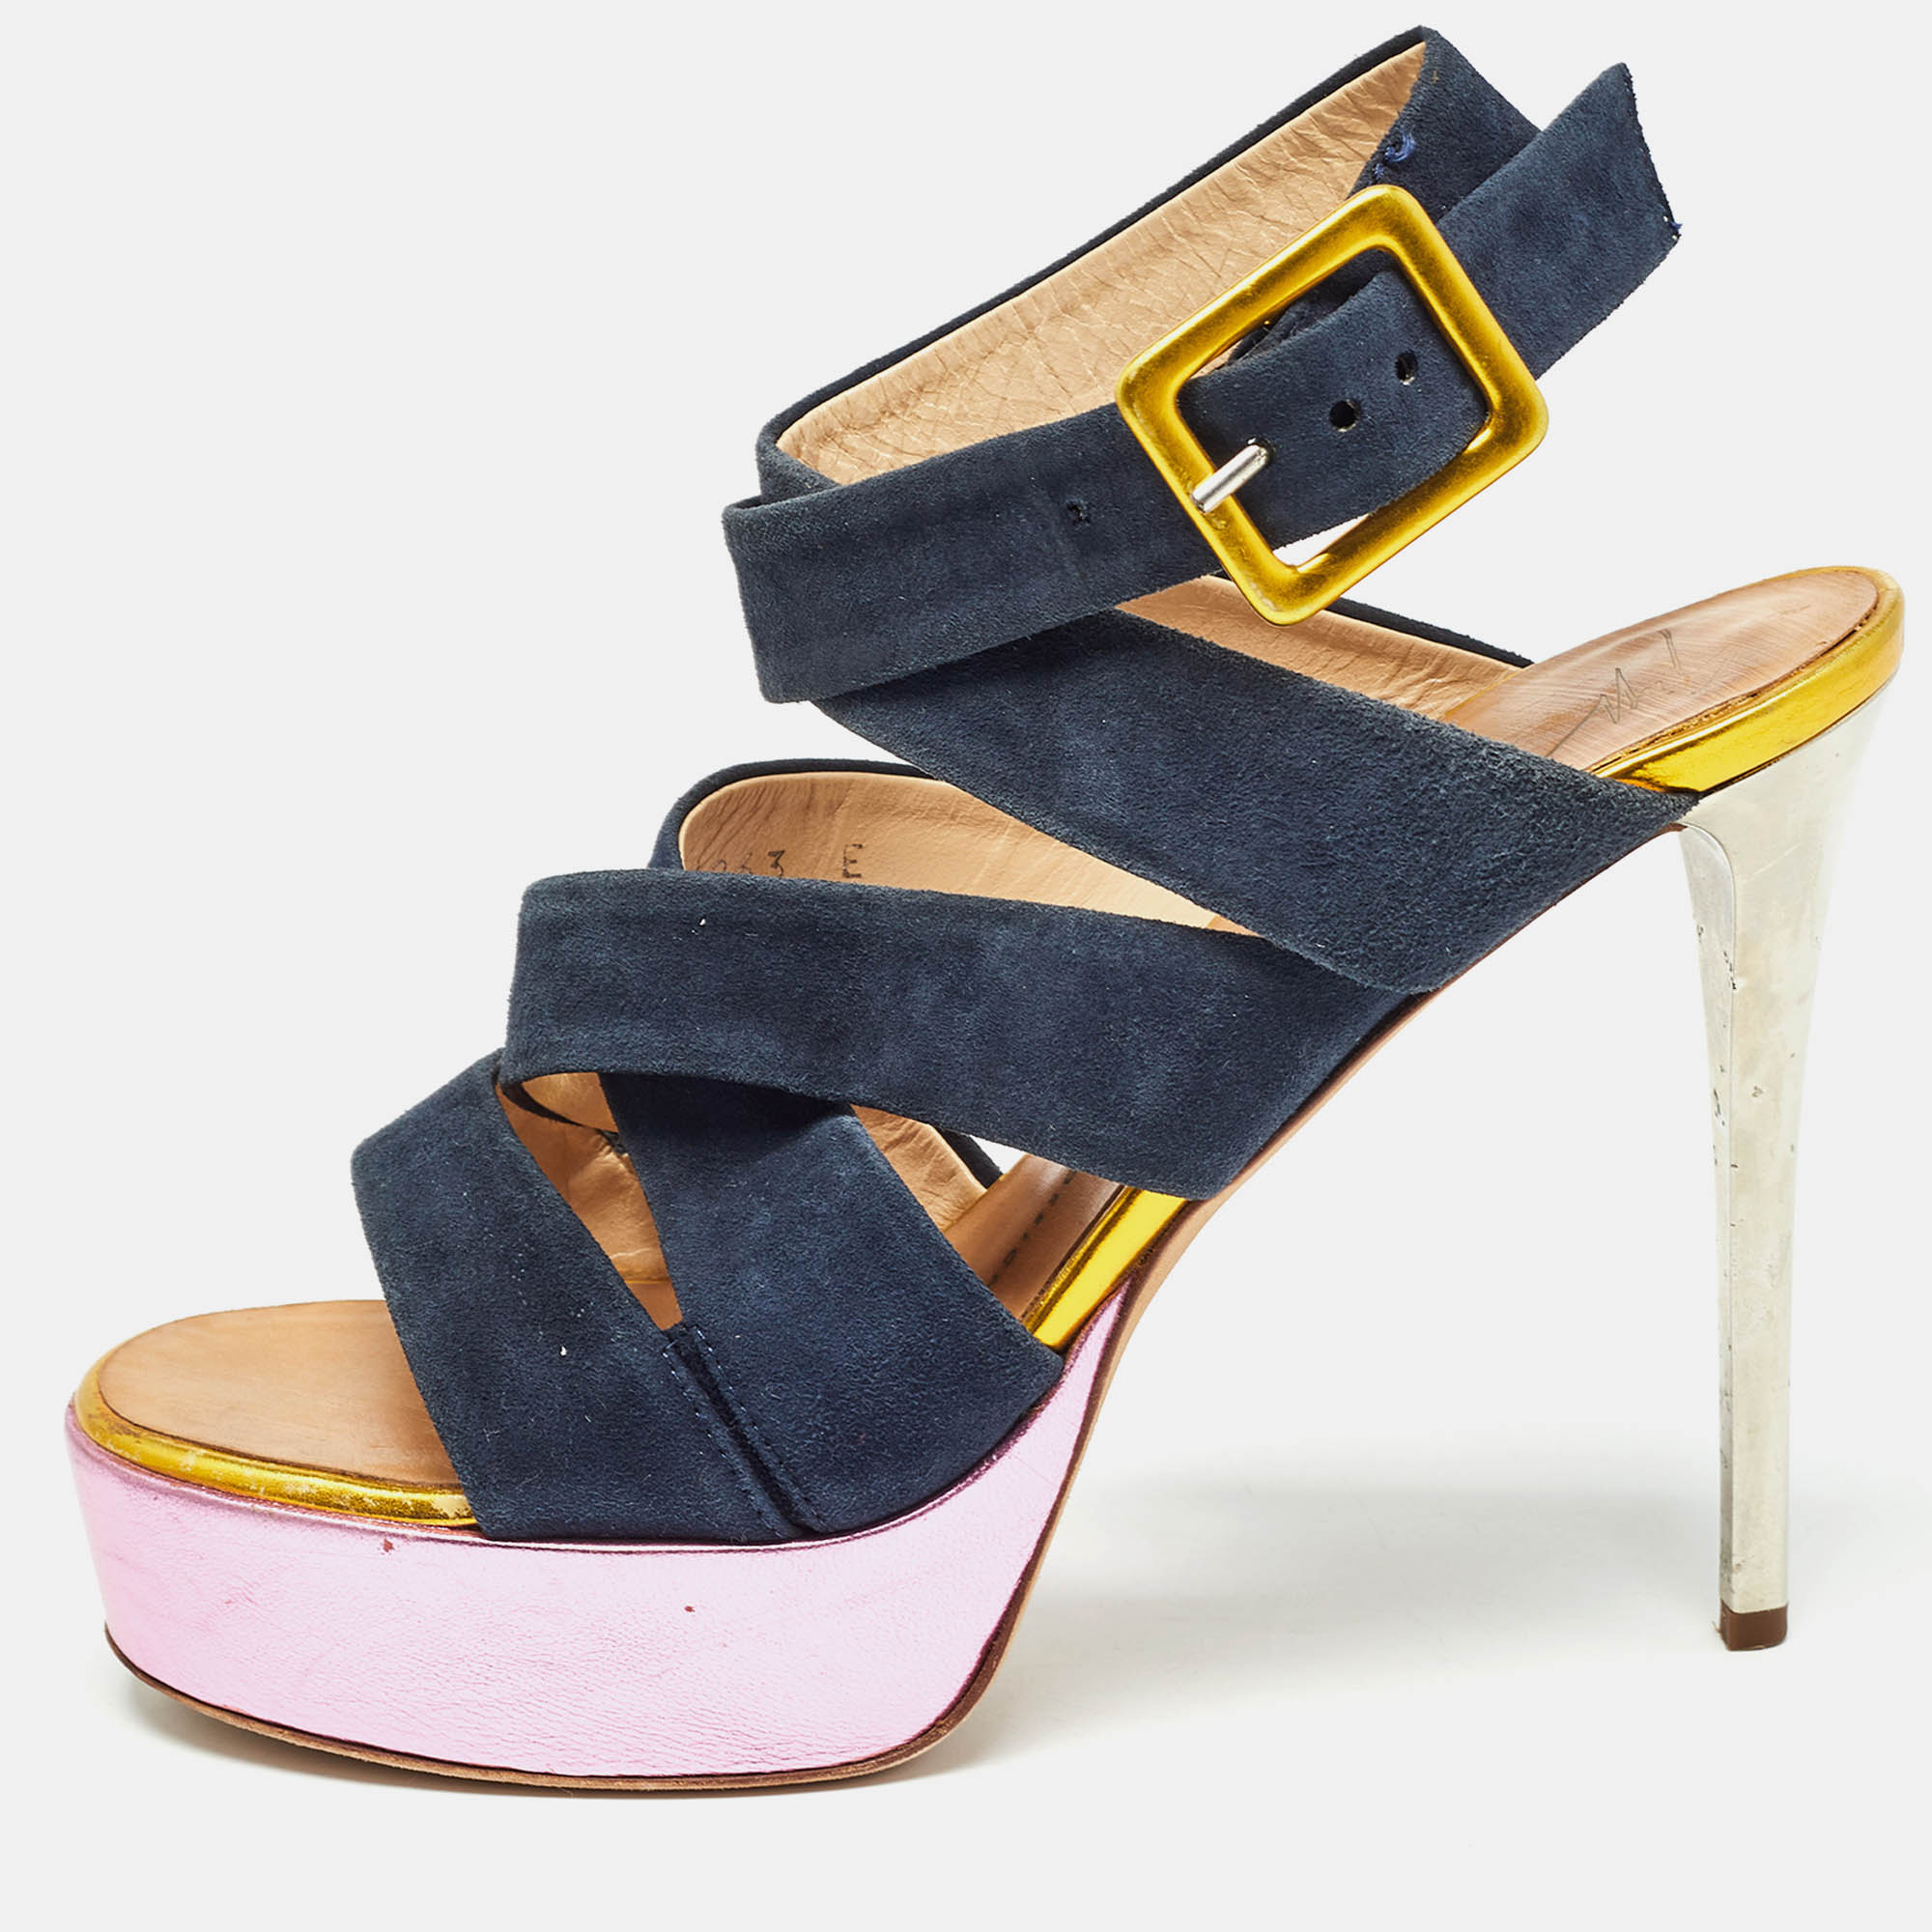 

Giuseppe Zanotti Multicolor Suede and Leather Platform Sandals Size, Navy blue